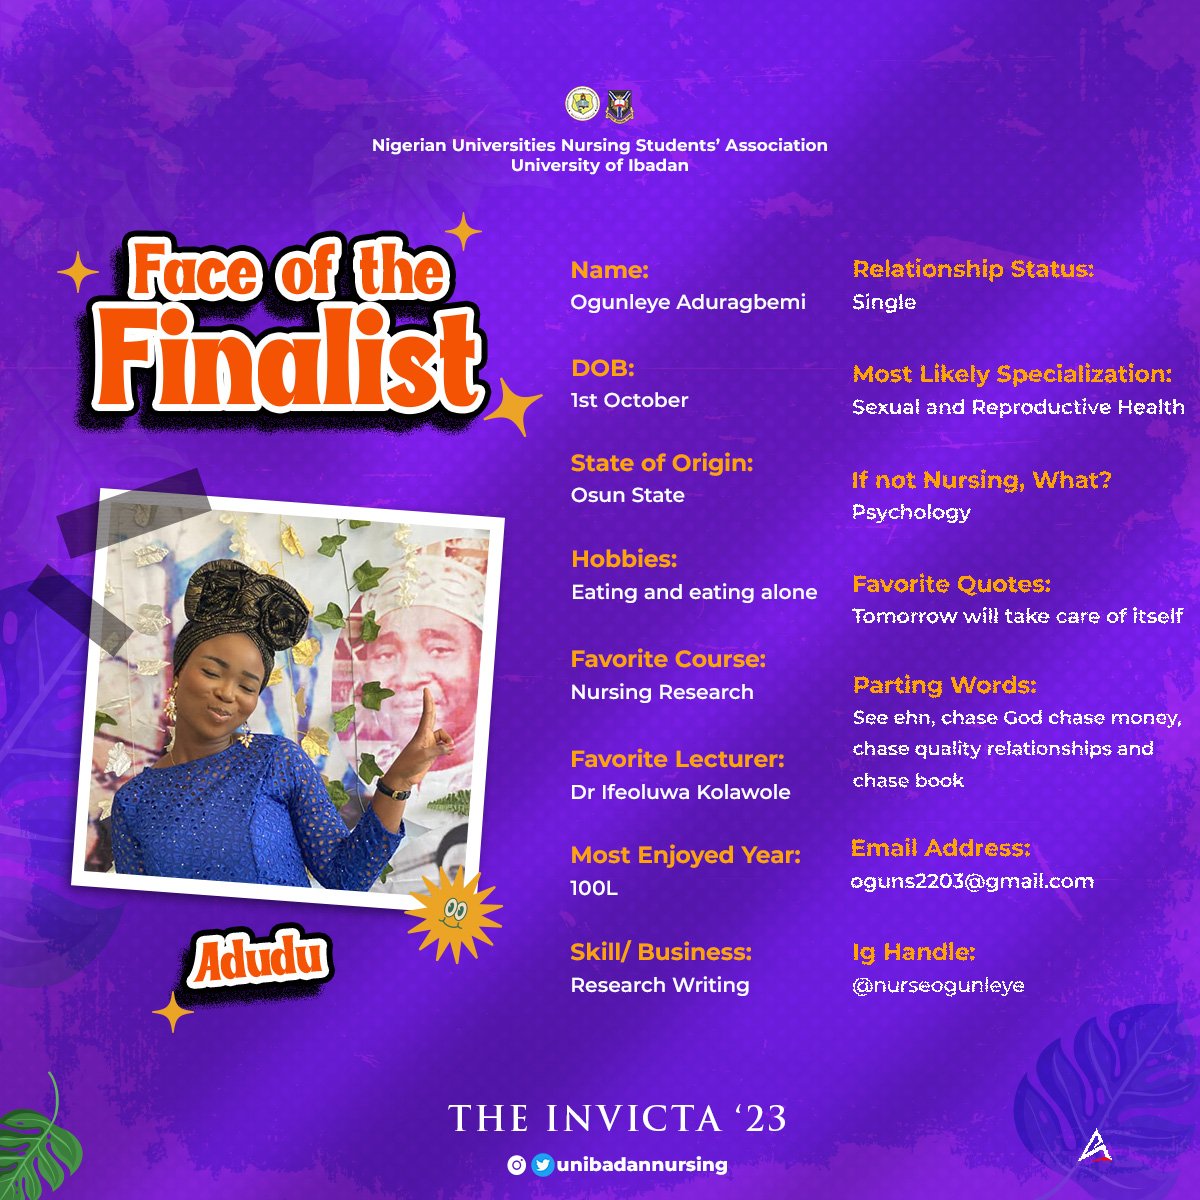 17 & 18/37🚀

Meet  Badmos Comfort and Ogunleye Aduragbemi, the finalists we are spotlighting today! 🥂✨

They are the faces of the finalists for The Class Invicta 23' today! 😇🥳

#Finalistoftheday #NUNSAUI #UnibadanNursing #FridayVibes